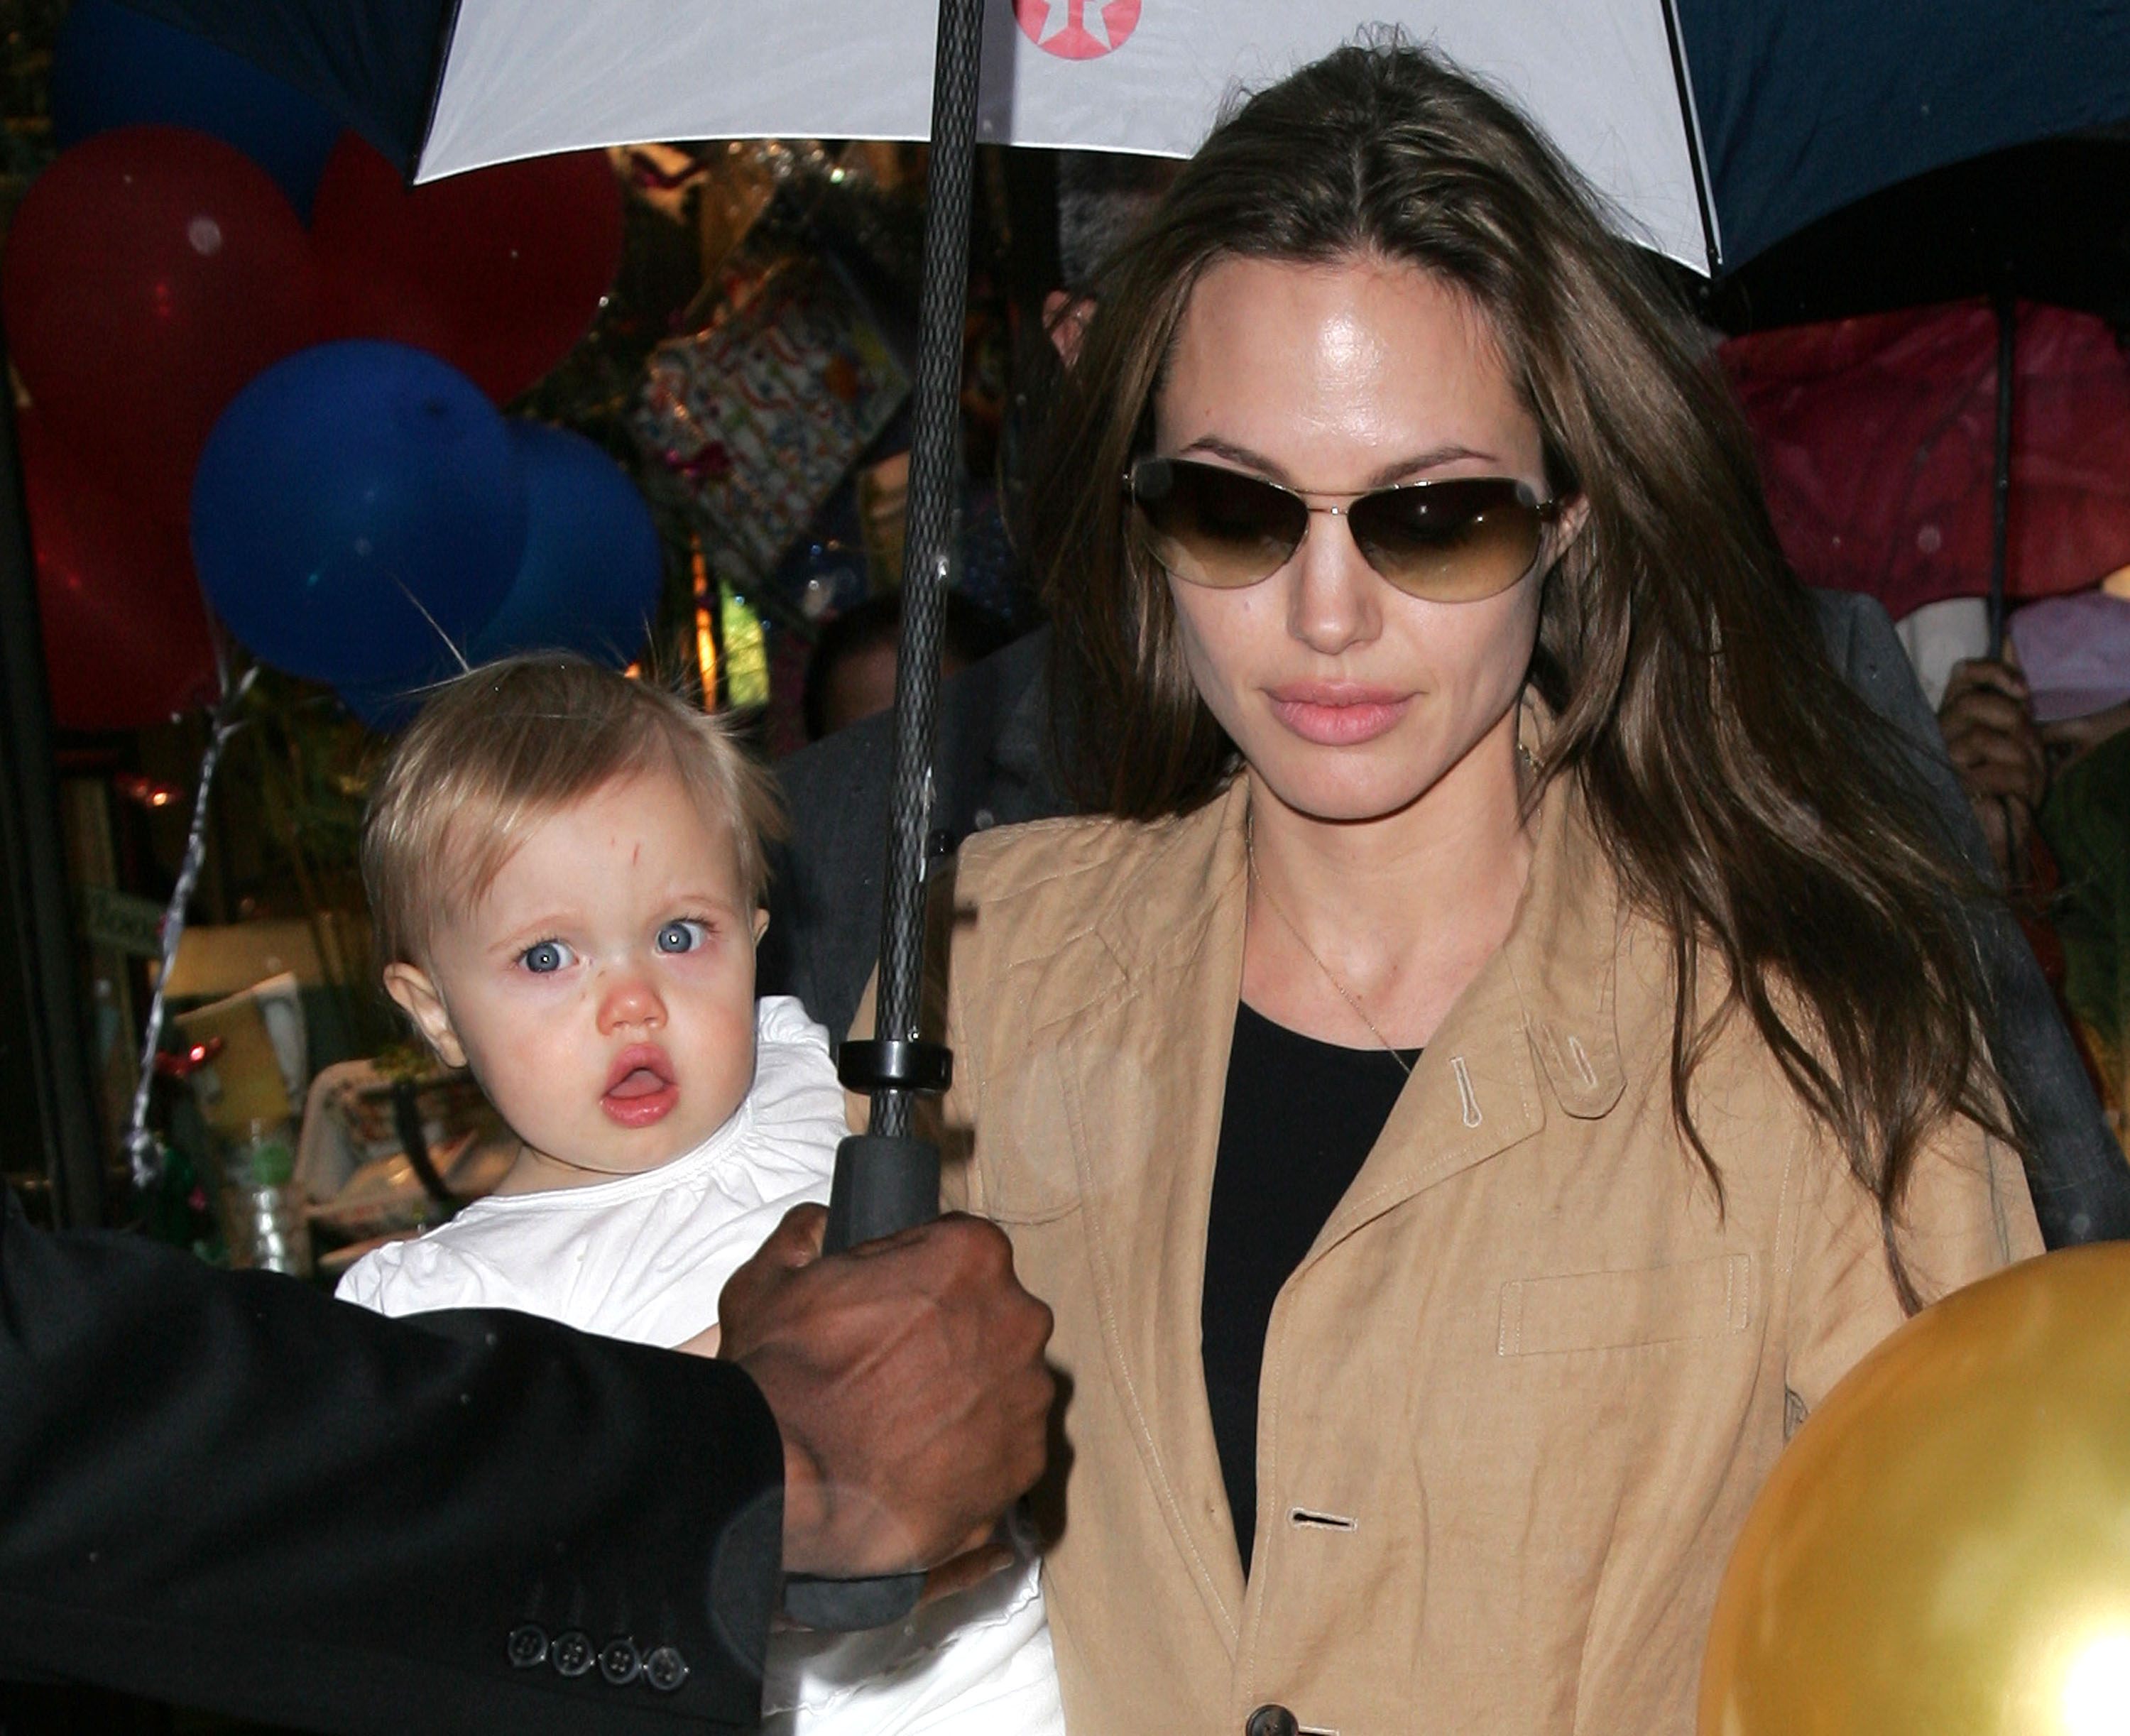 Angelina Jolie and her daughter Shiloh in New York in 2007. | Source: Getty Images